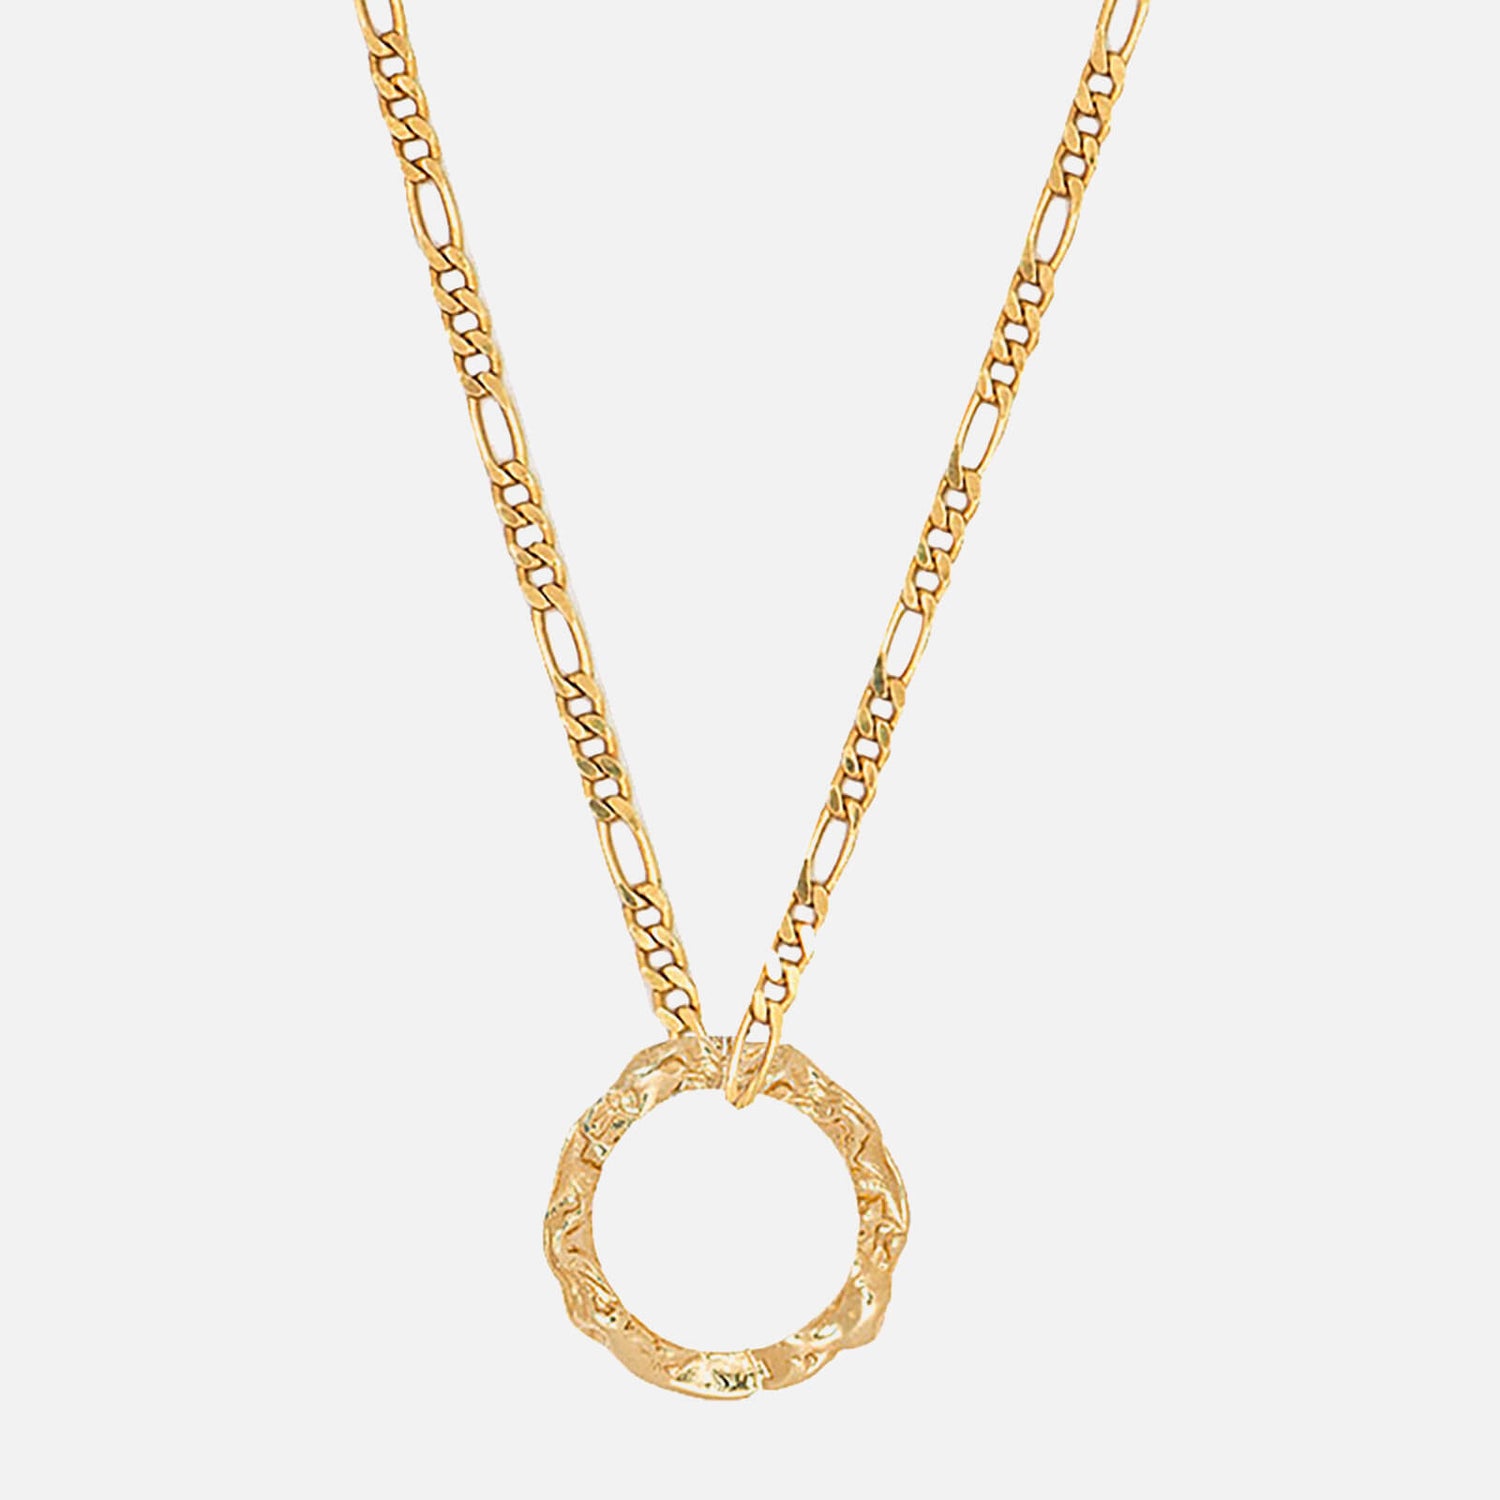 Hermina Athens Women's Full Moon Grecian Necklace - Gold